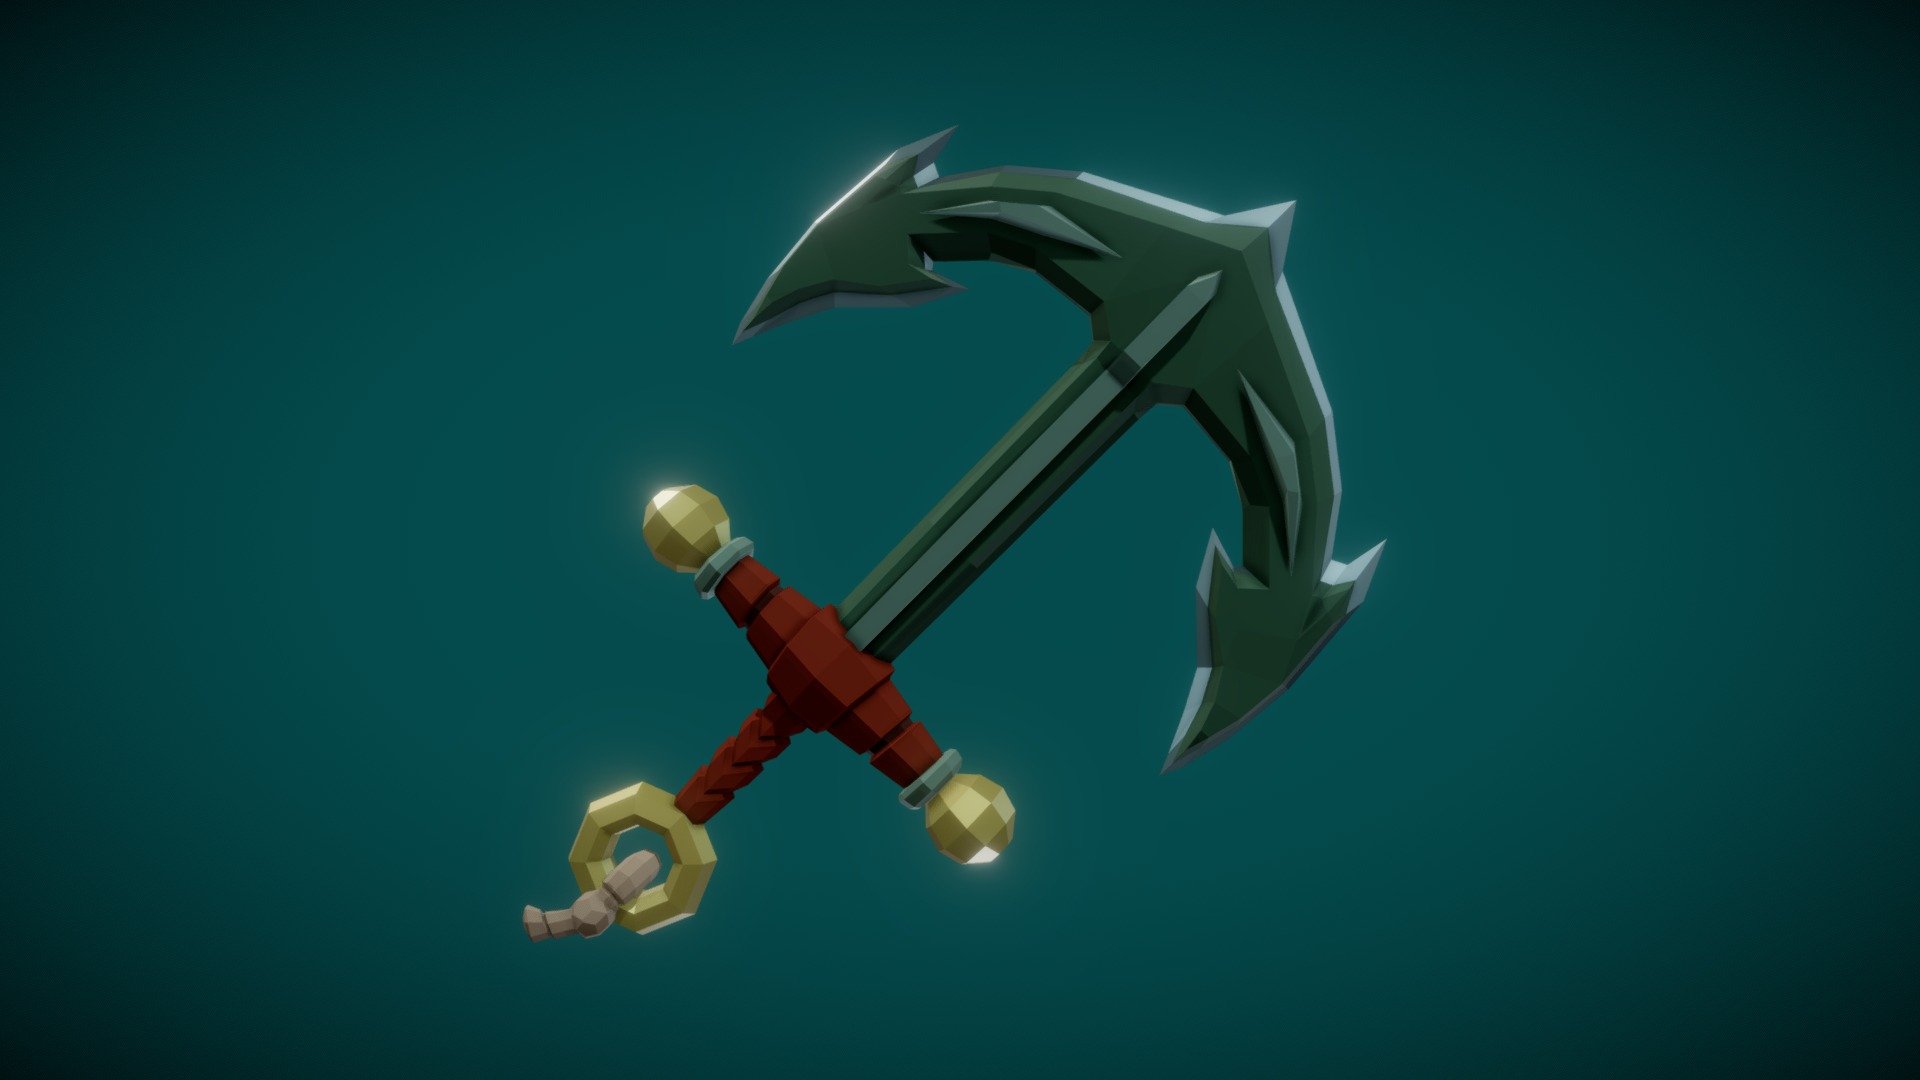 Swordtember2021 Day 8: #Anchor.
Tidecleaver.

Once wielded by a fearsome captain of the seas, cursed to roam the oceans forever.

Swordtember - Swordtember 2021 Day 8: Anchor - 3D model by Liberi Arcano (@LiberiArcano) 3d model